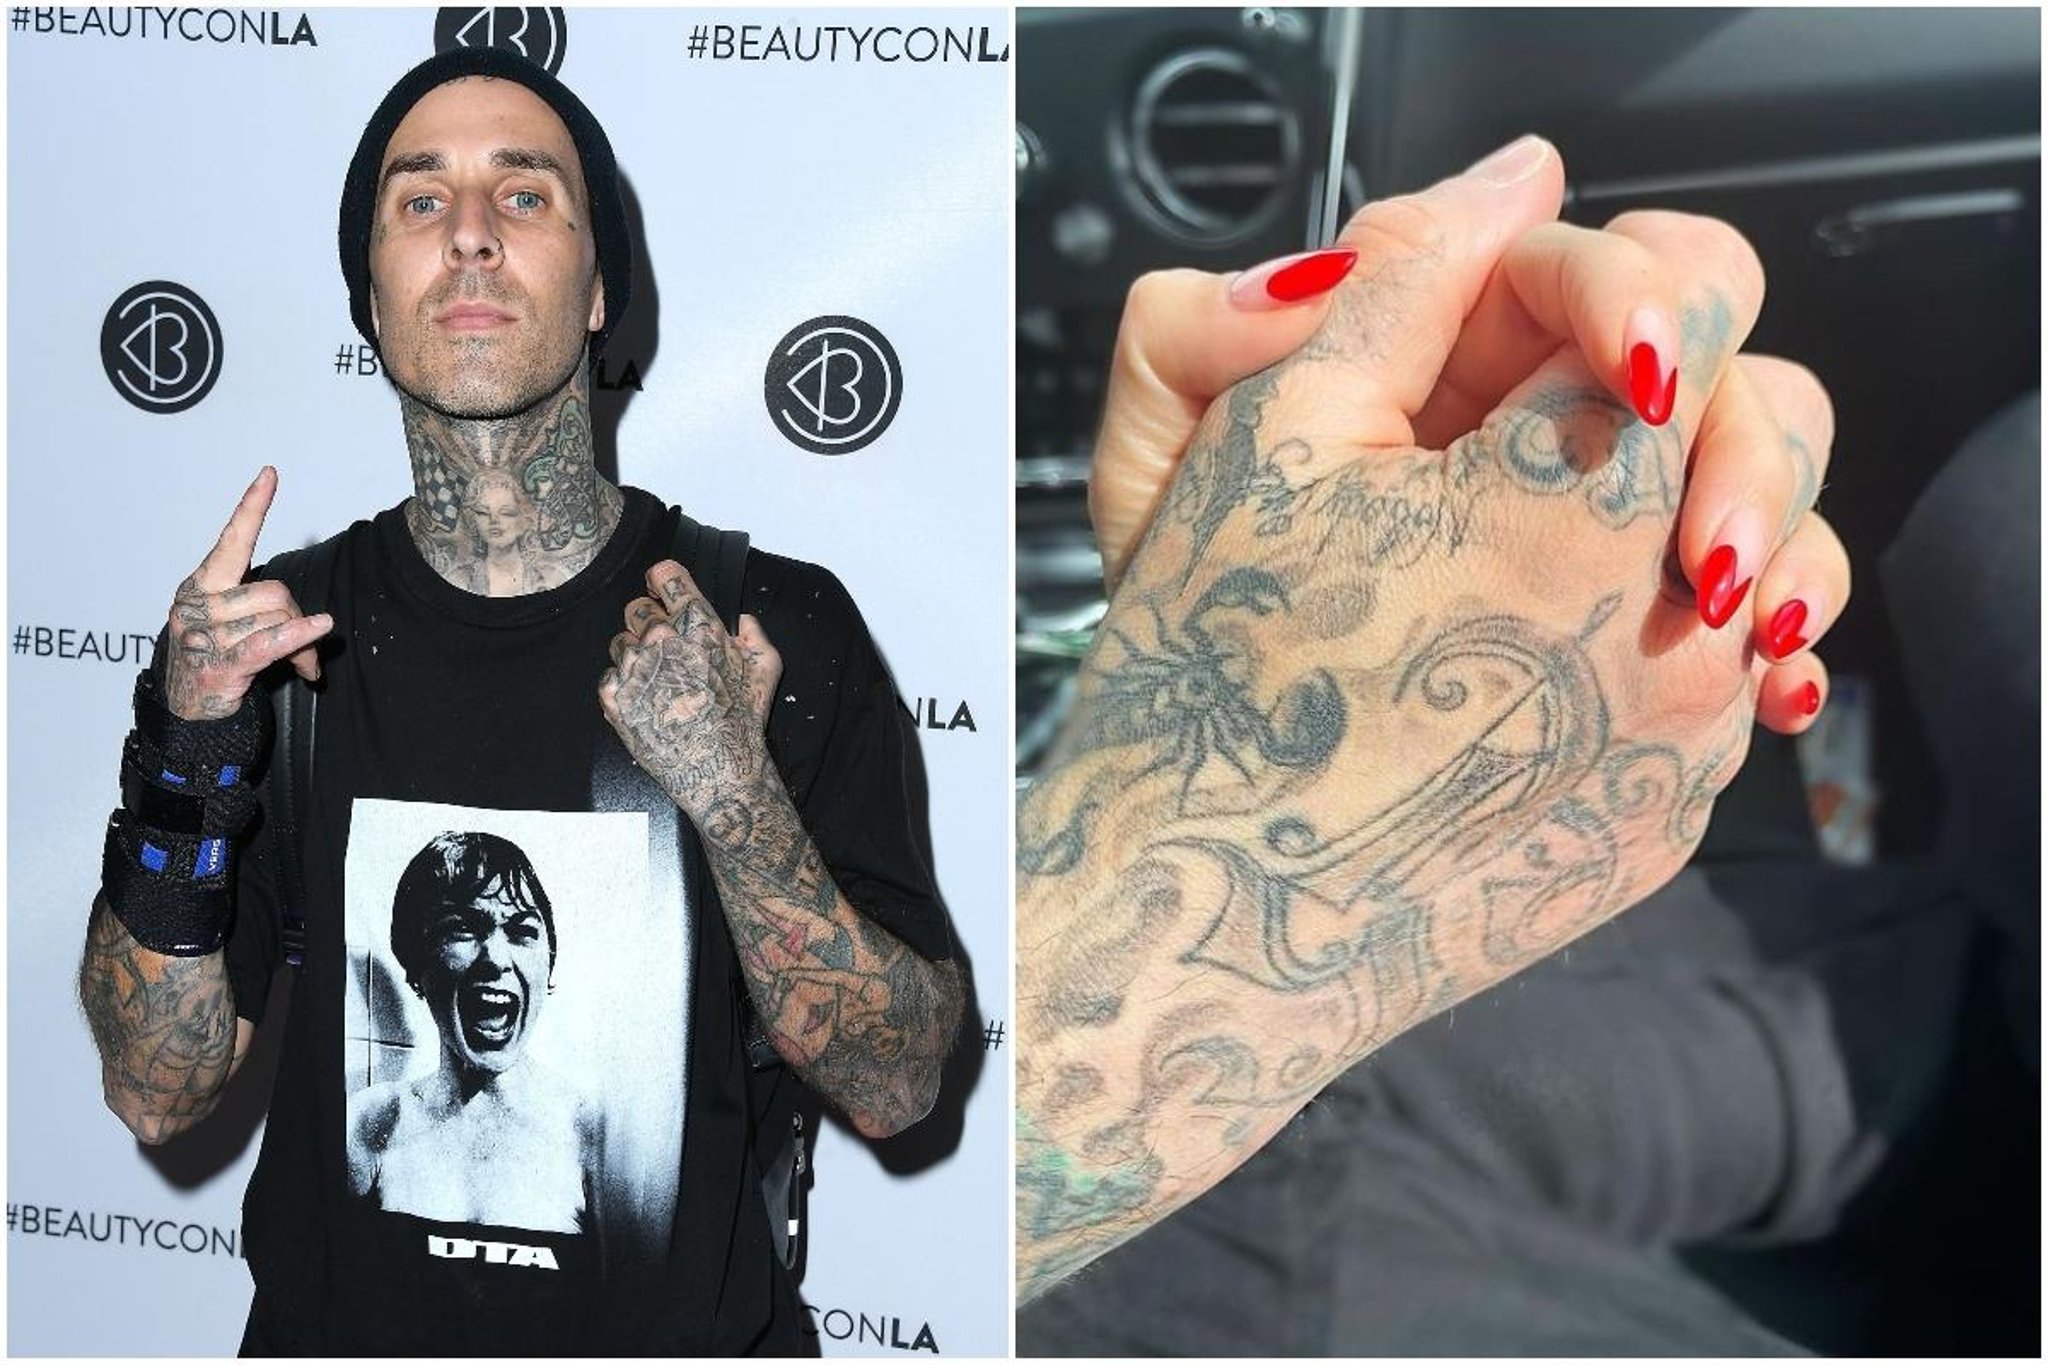 Travis Barker Who Is Kourtney Kardashian S New Boyfriend How Long Have They Been Dating And Does He Have Kids The Scotsman Browse 337 travis barker kids stock photos and images available, or start a new search to explore more stock photos and images. travis barker who is kourtney